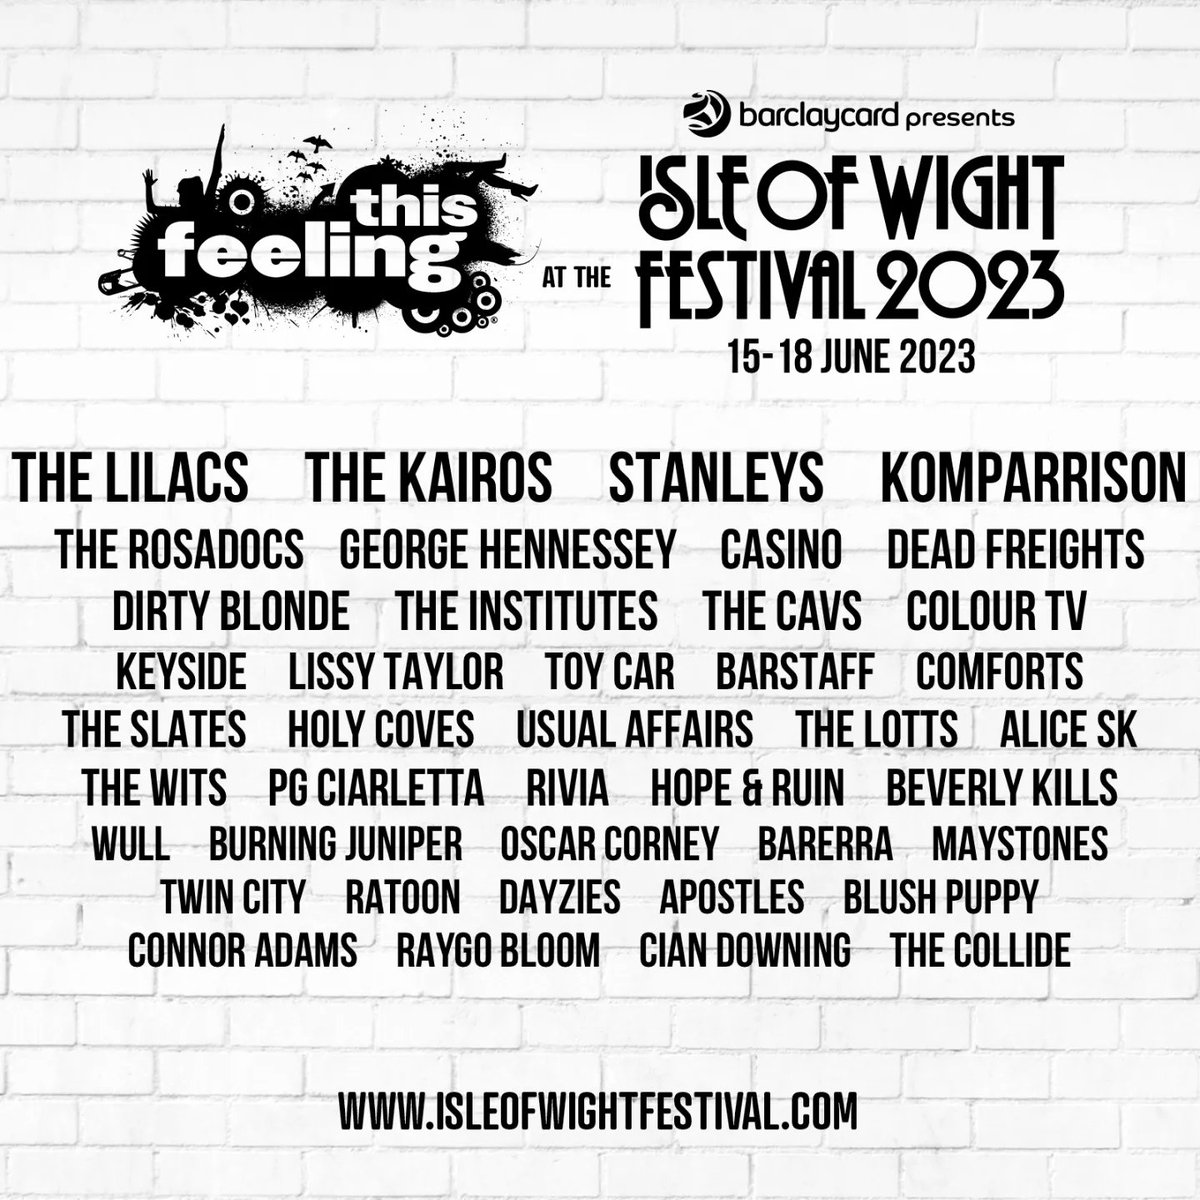 Festi Announcement! Very excited to be jumping back on the decks DJing at @IsleOfWightFest again for @This_Feeling alongside @ninetiesmike & @shiner_sam 🎶 Mega lineup too! Let's 'av it! See ya there in a couple of weeks 🙌